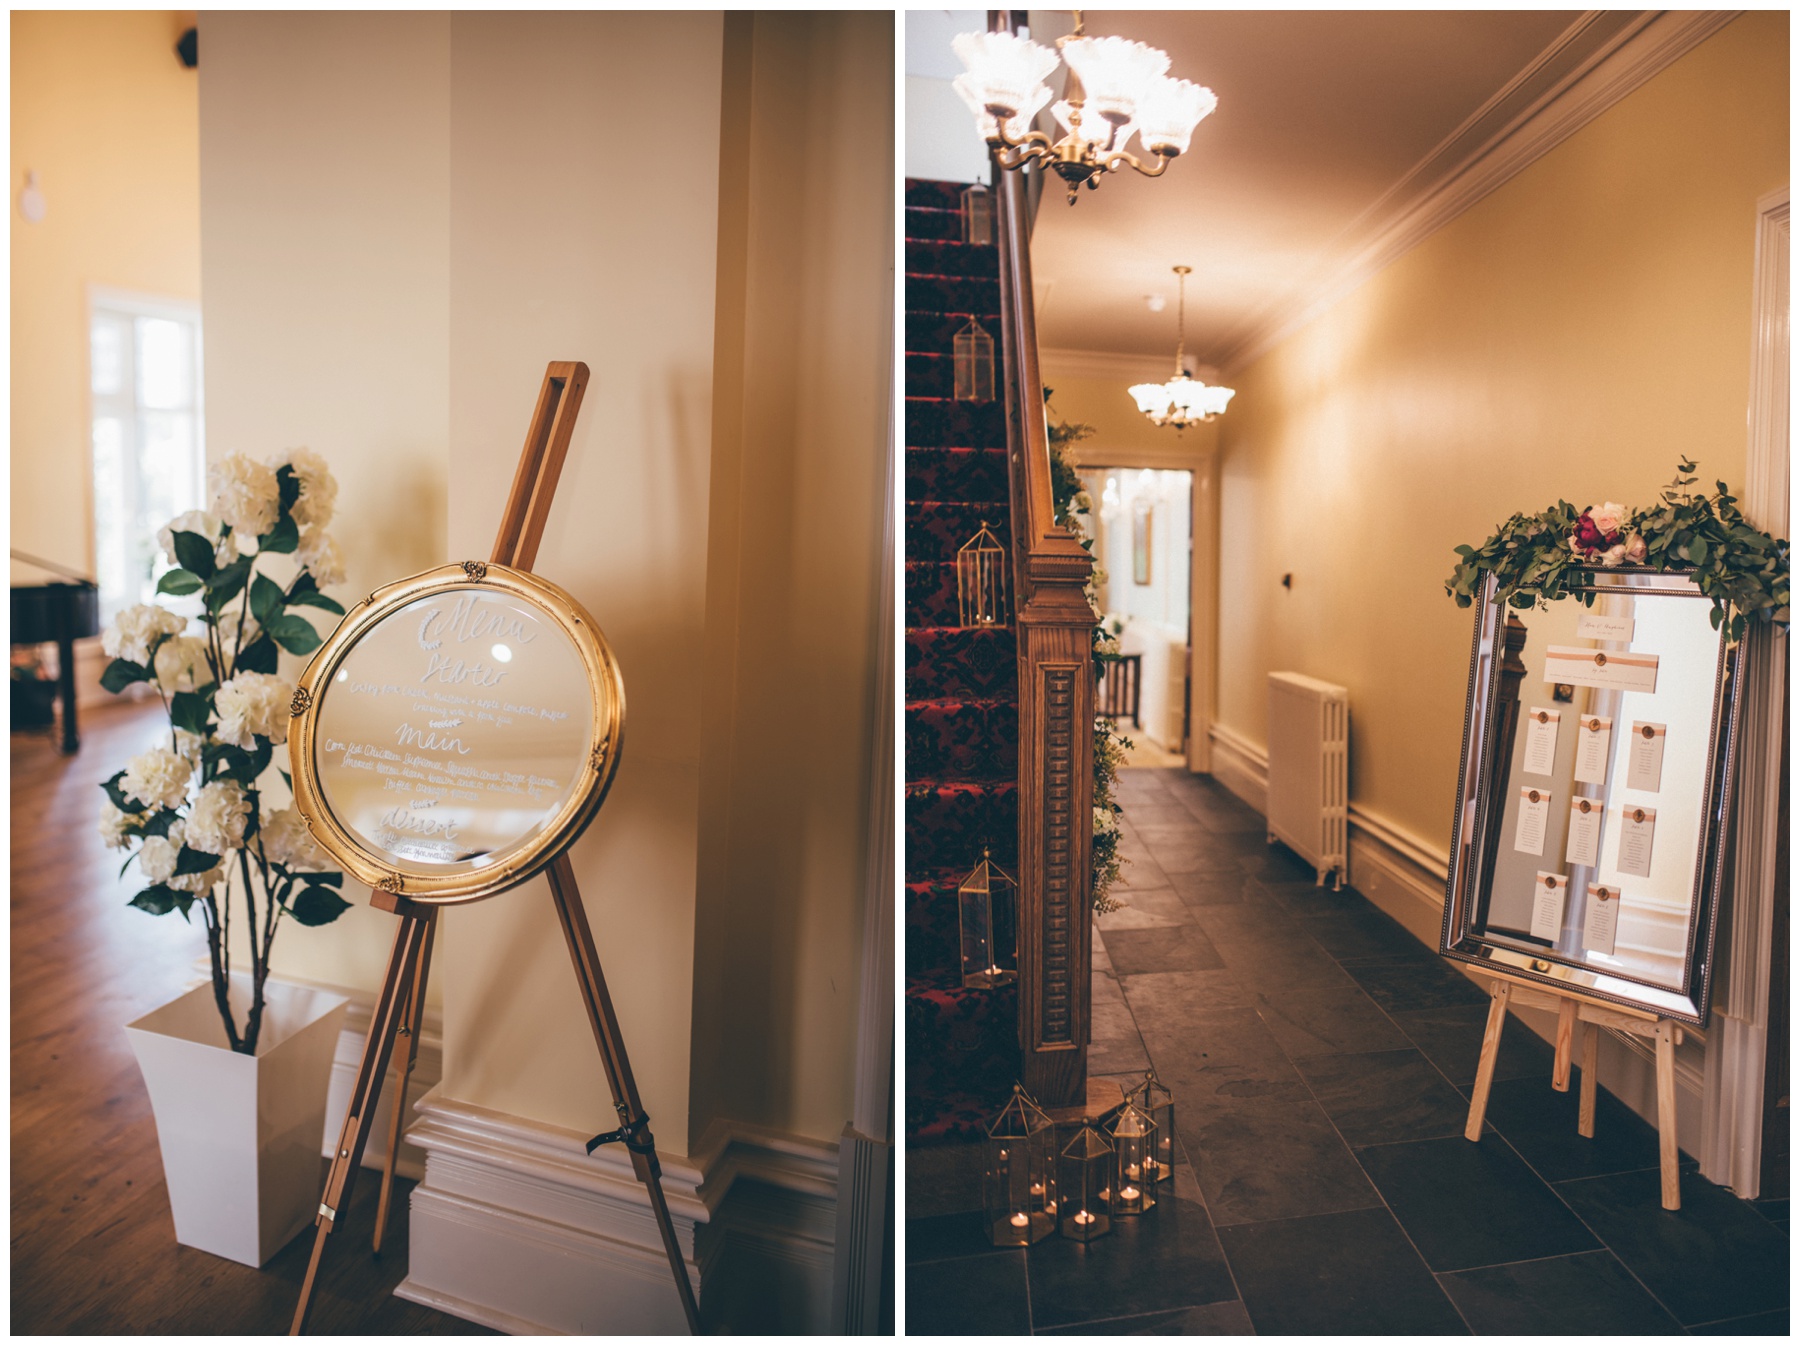 Tilstone House details for the spring time wedding.